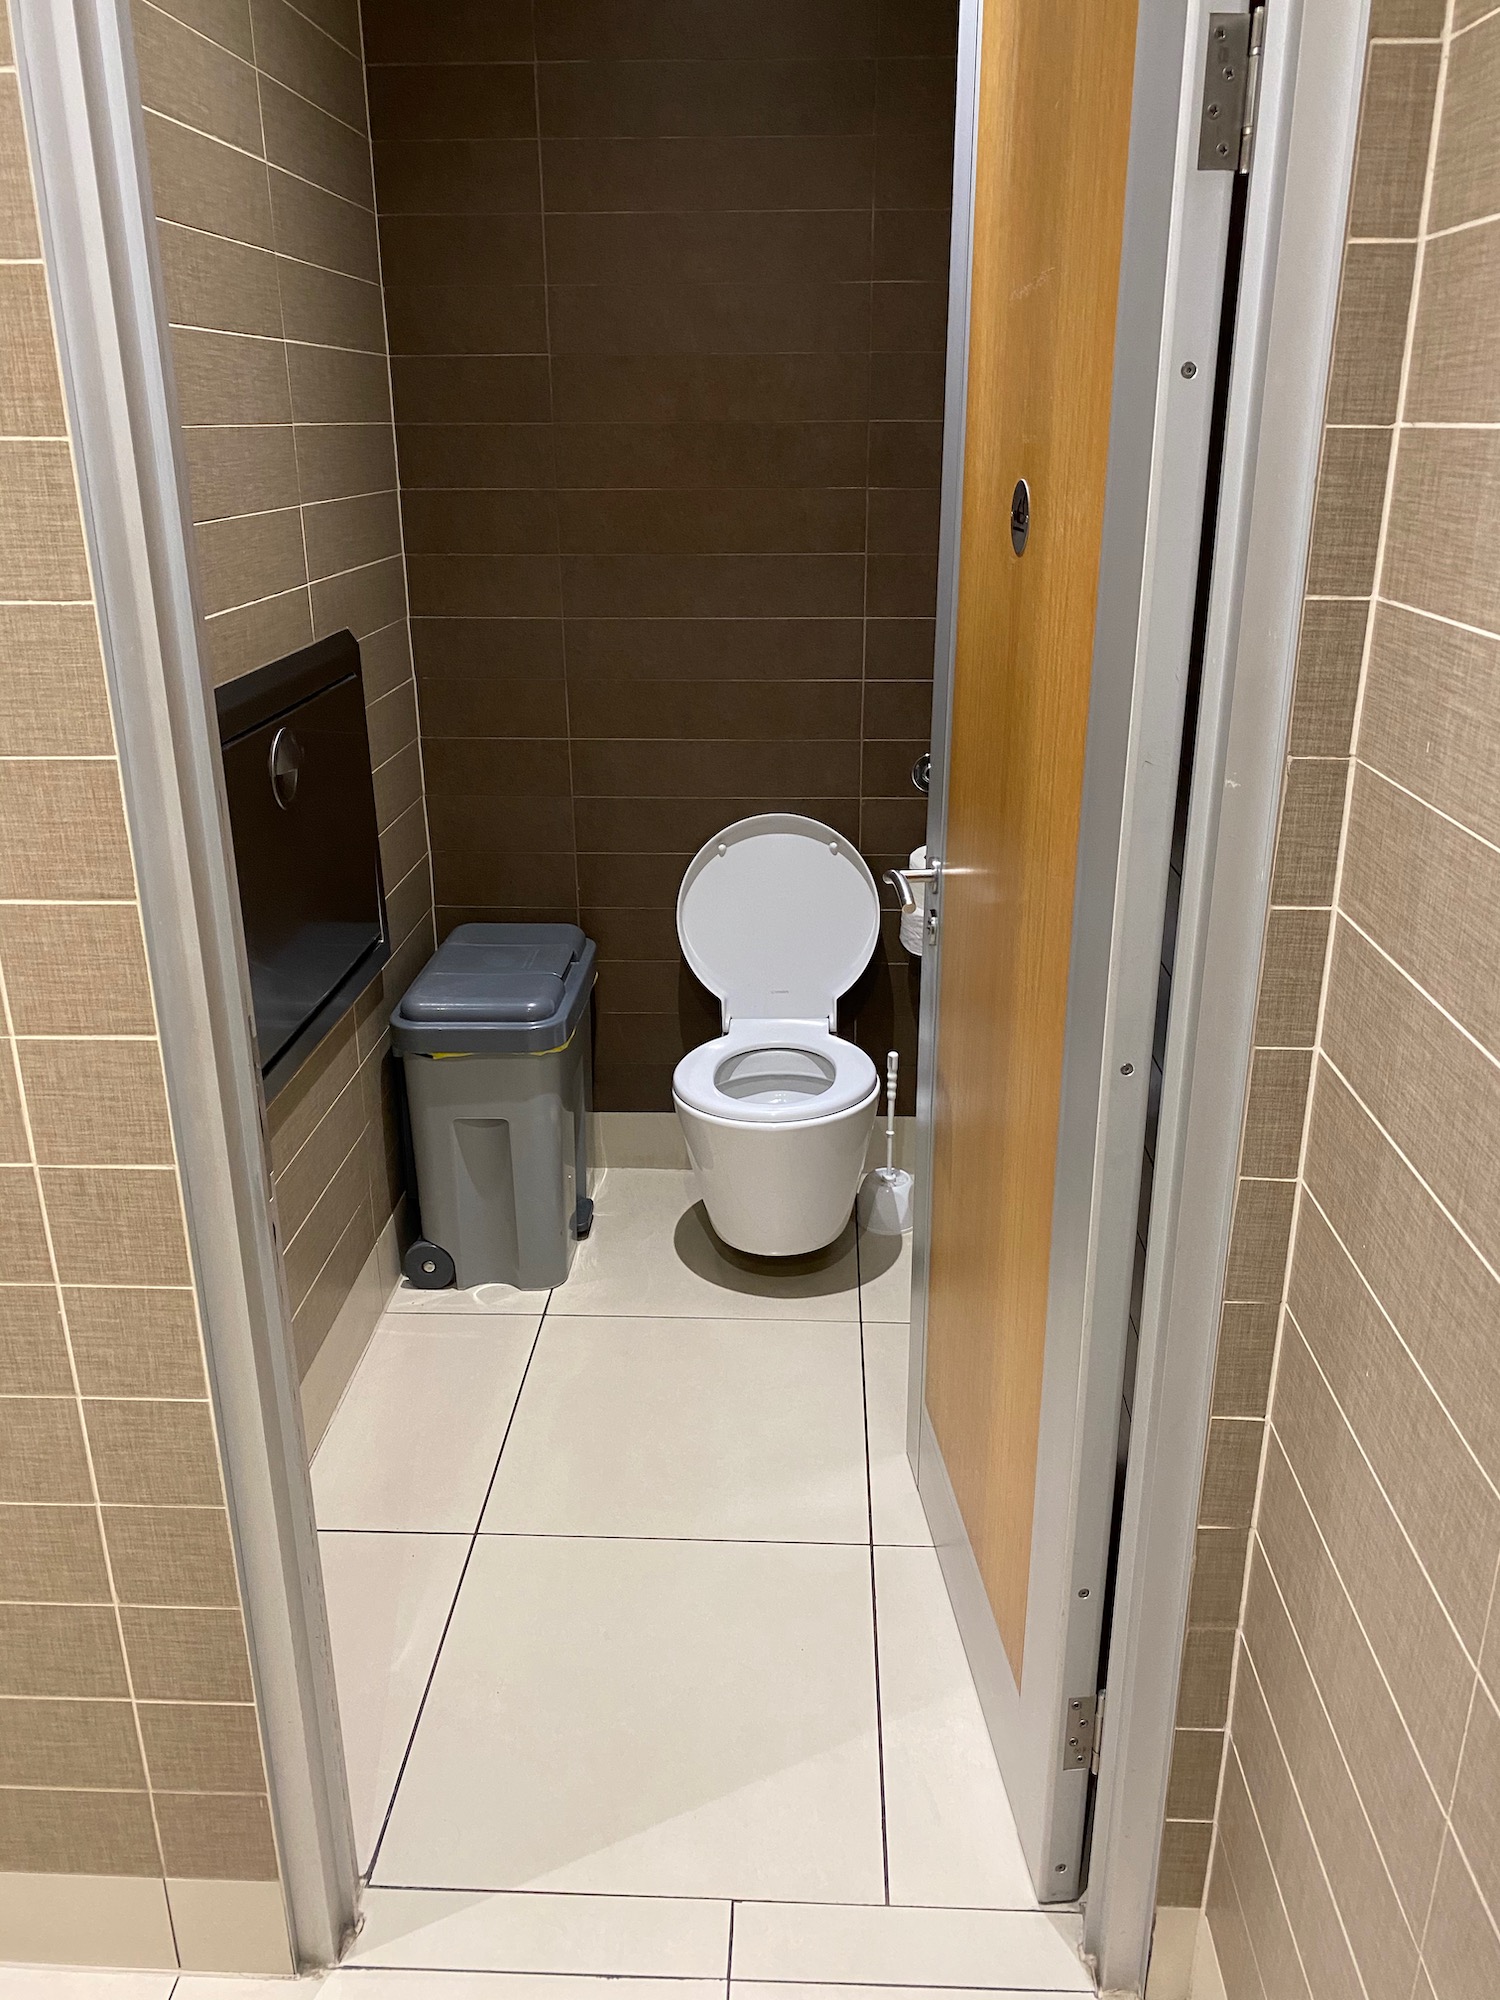 a bathroom with a toilet and trash can